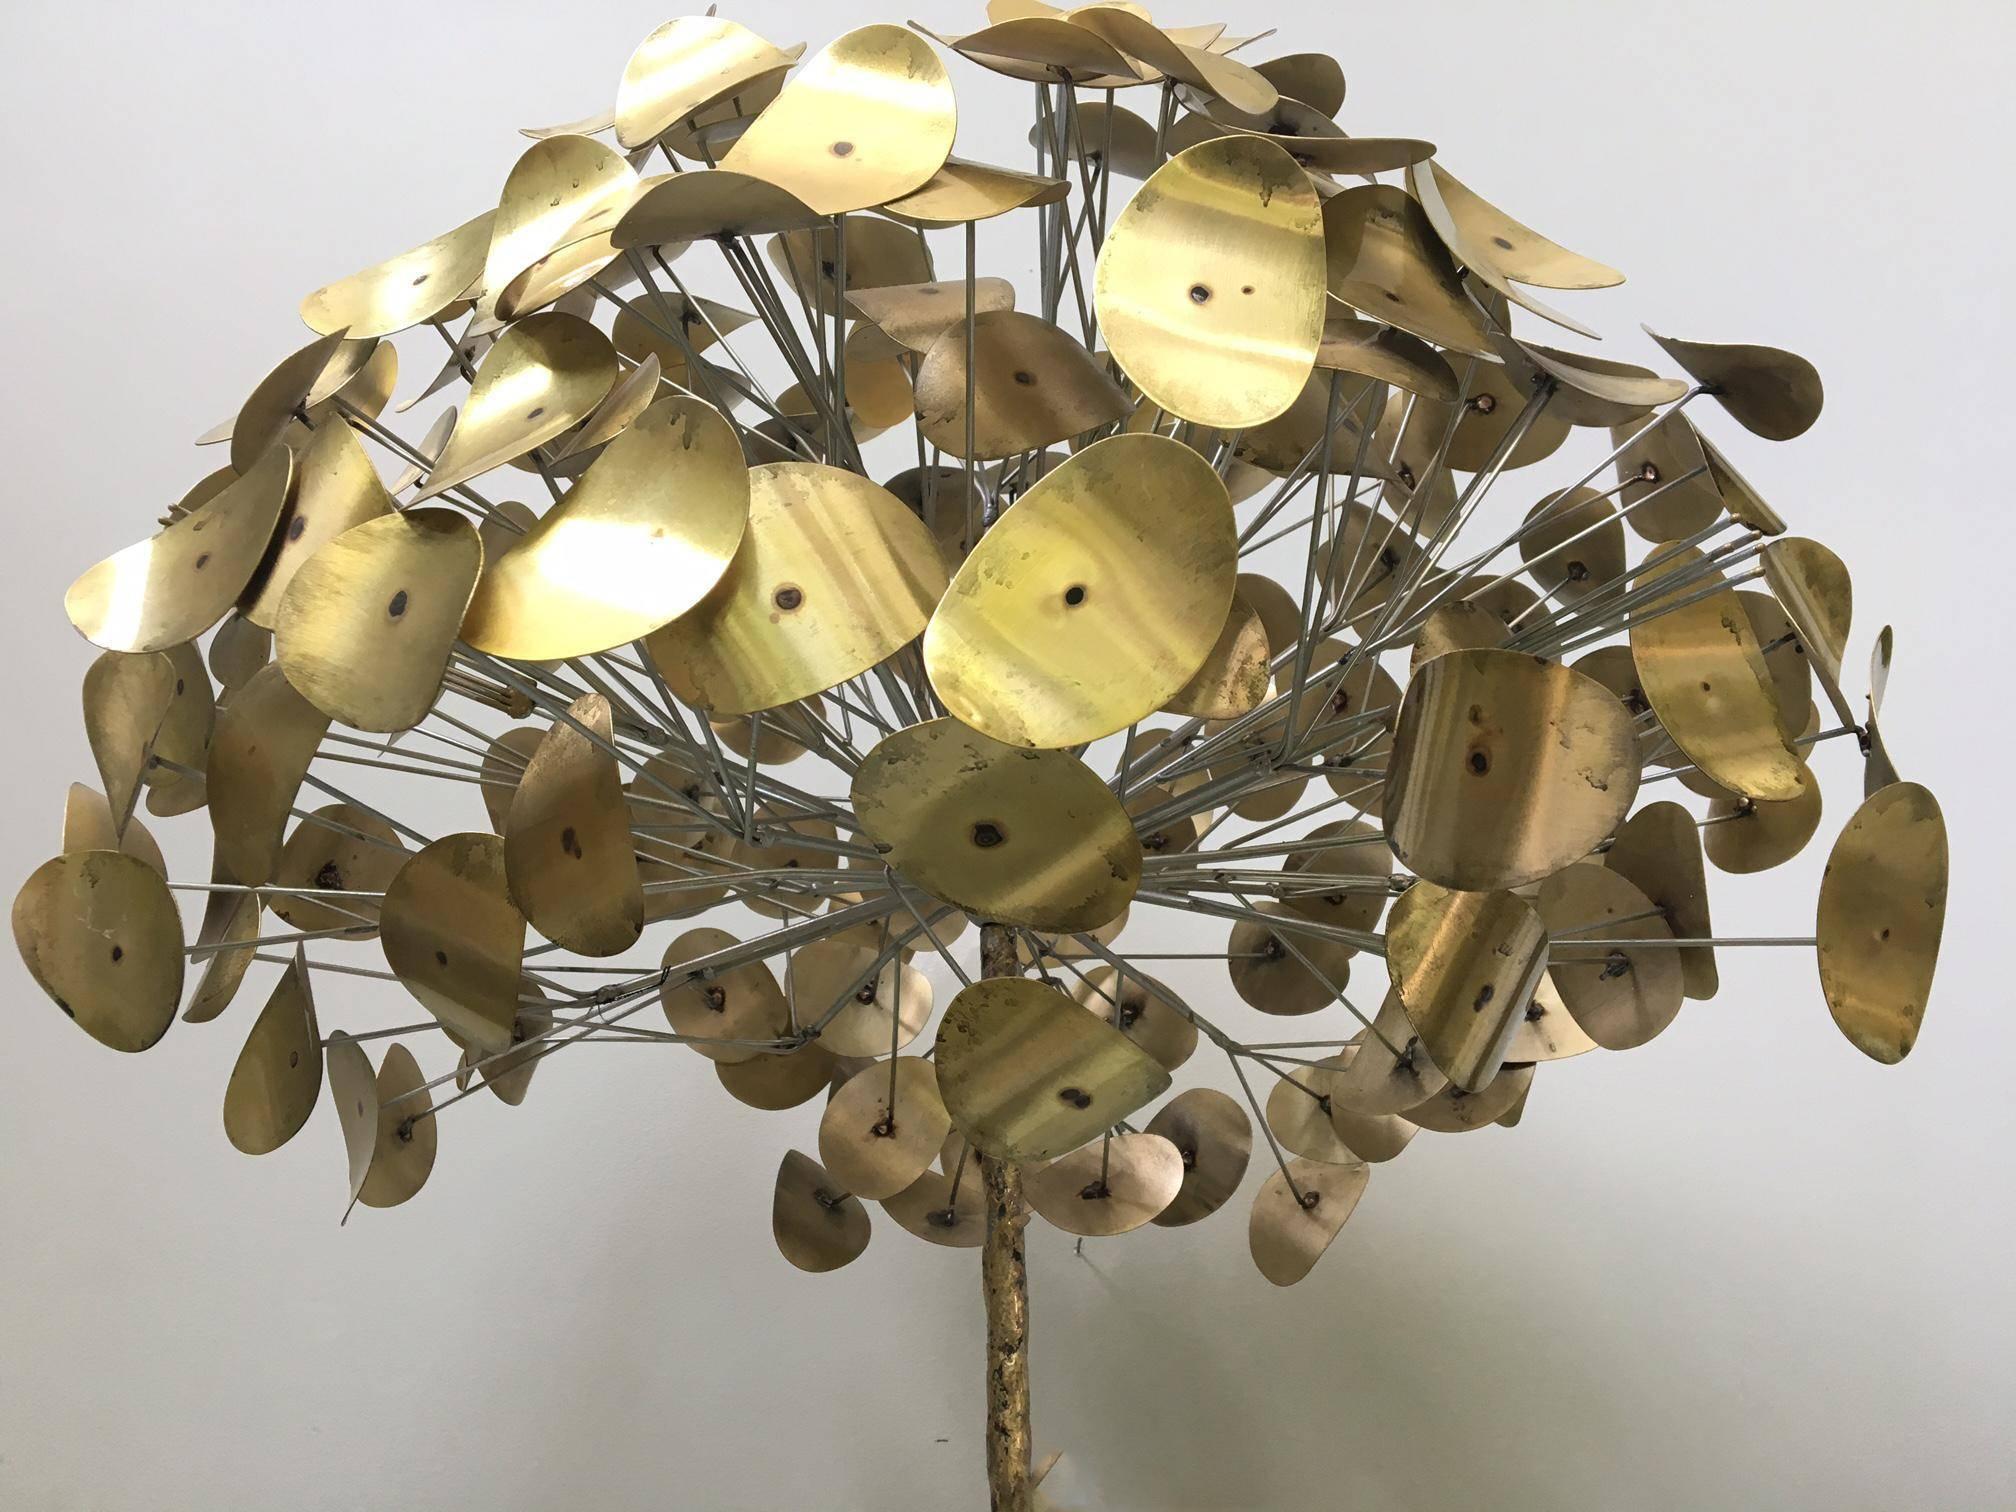 Rare Mid-Century Modern tree sculpture by C. Jere from the Raindrop series. In an exclusive partnership with Jonathan Adler, the sculpture was reissued by the Jere studio in very limited numbers. Brass leaves on steel rods mounted in a black plinth